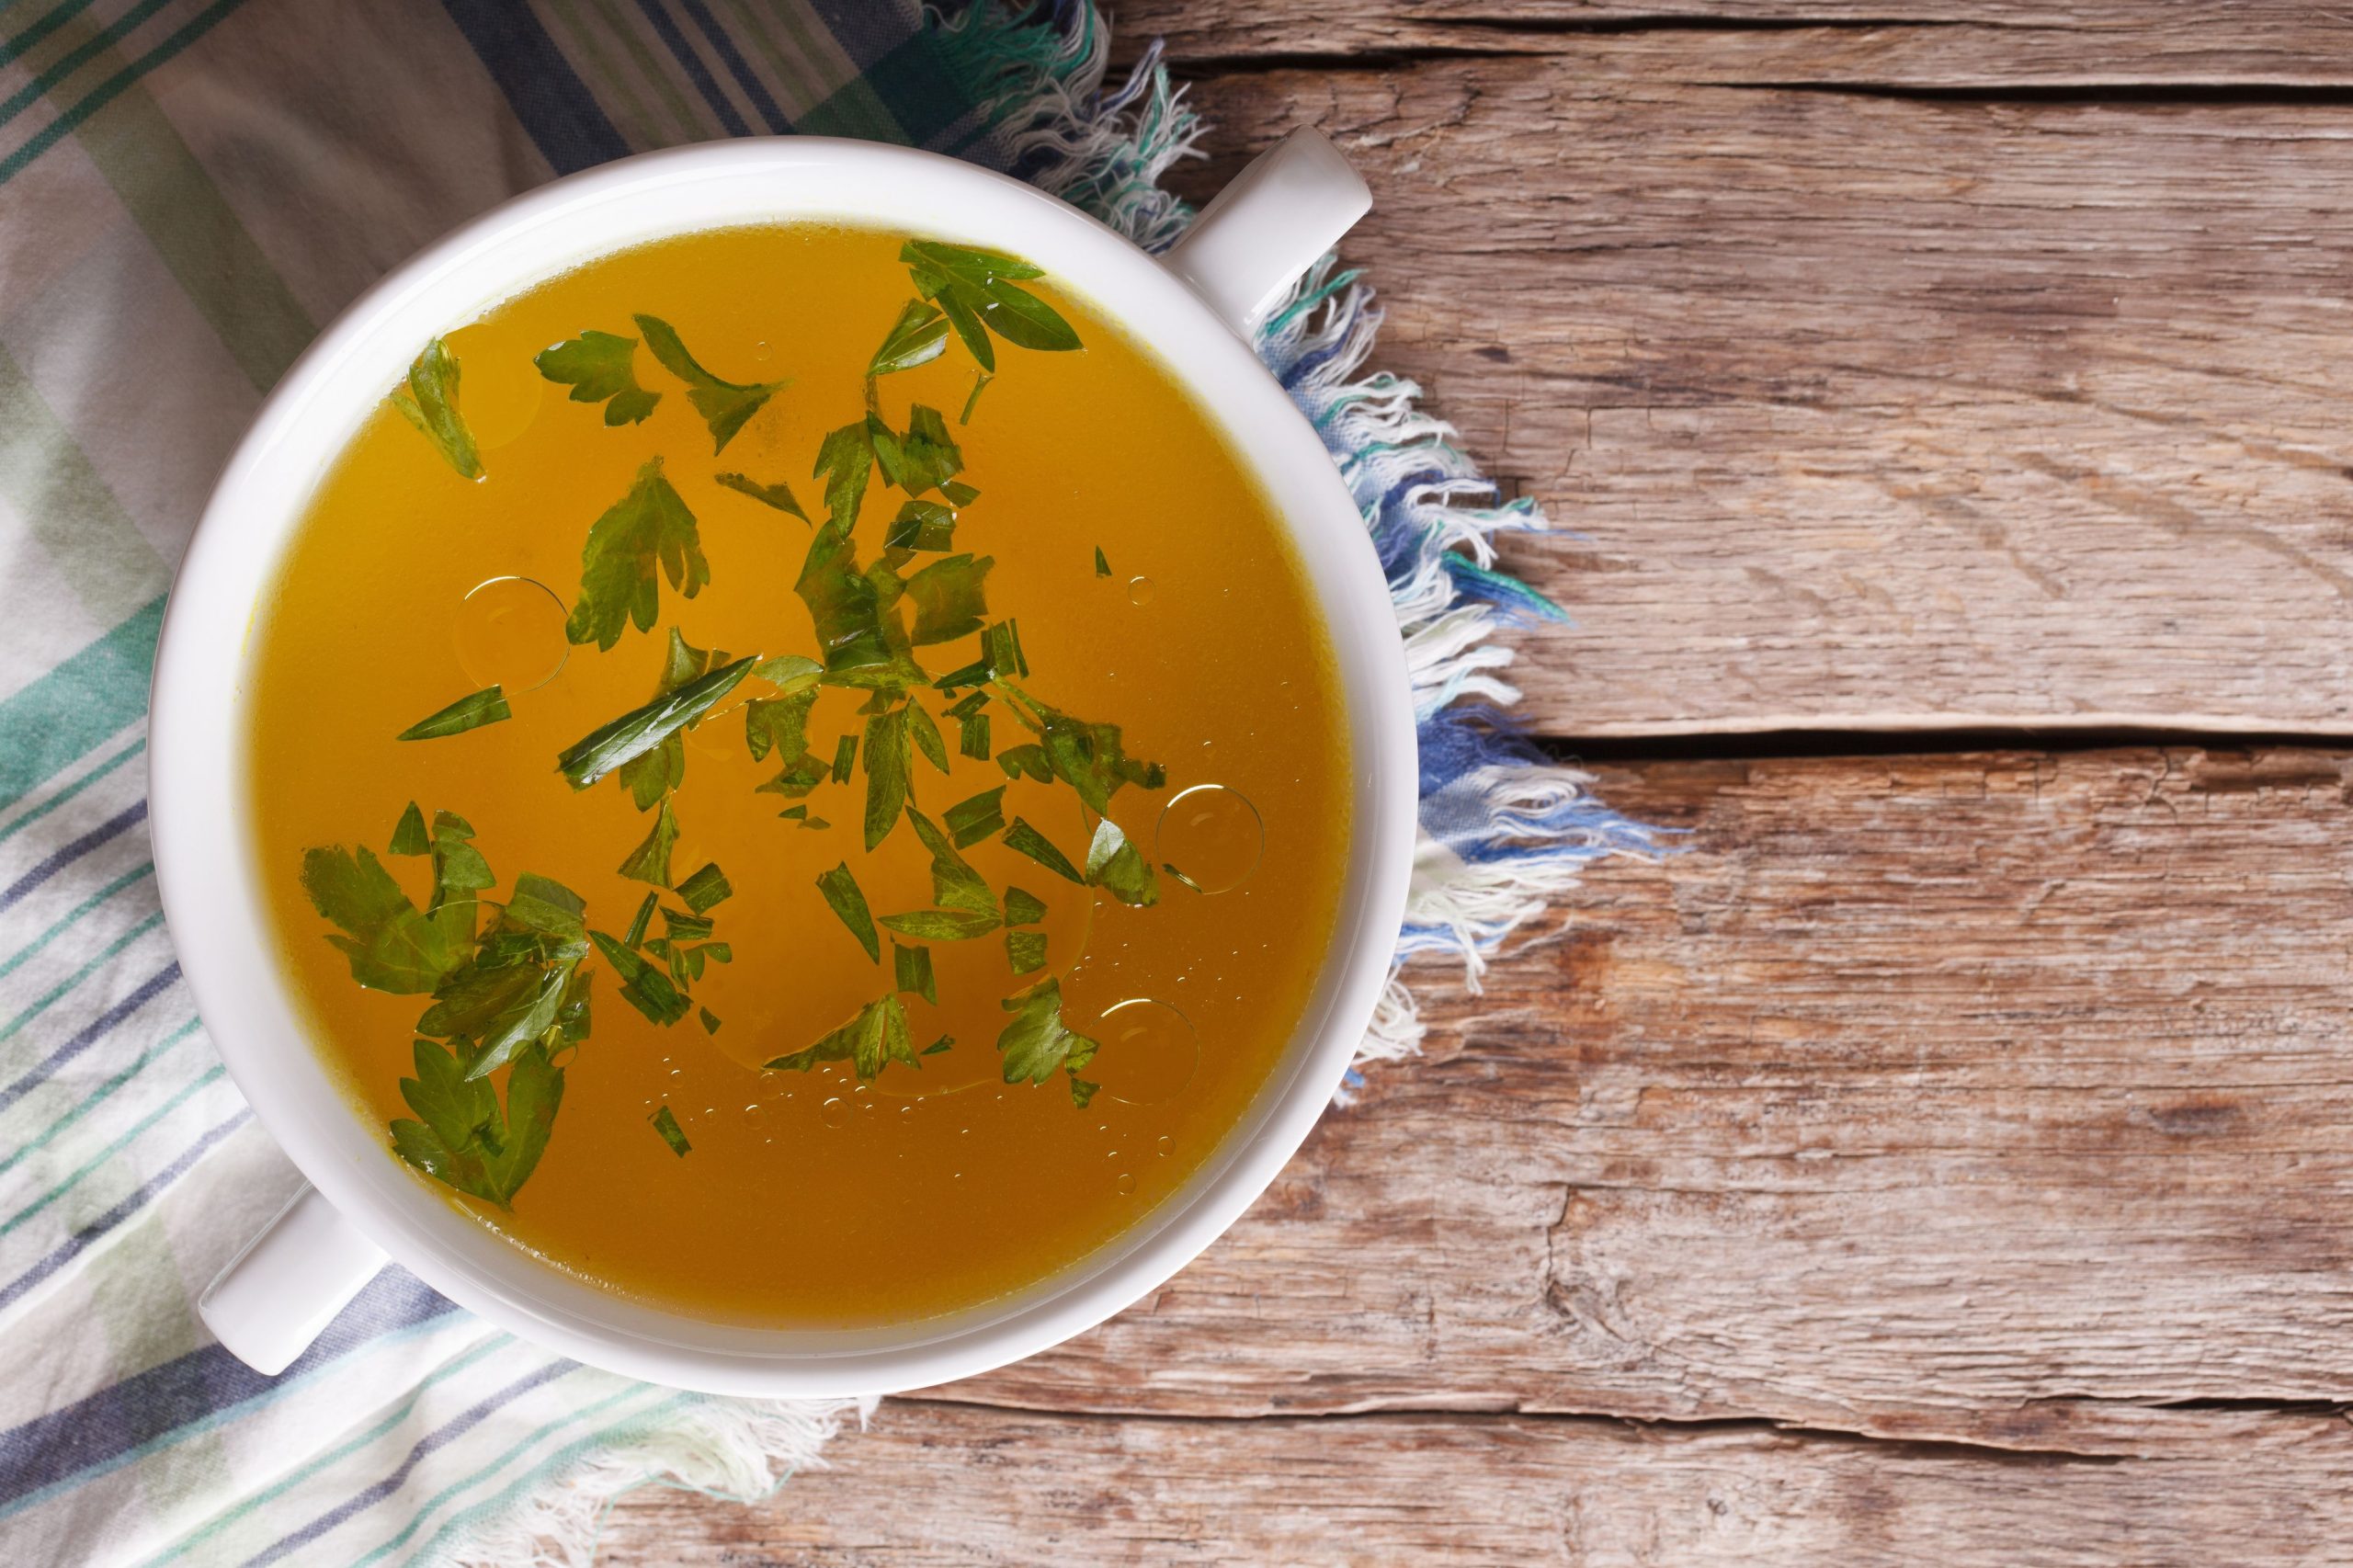 meat-broth-with-parsley-in-bowl-closeup-horizontal-royalty-free-image-494023846-1538777081-scaled.jpg